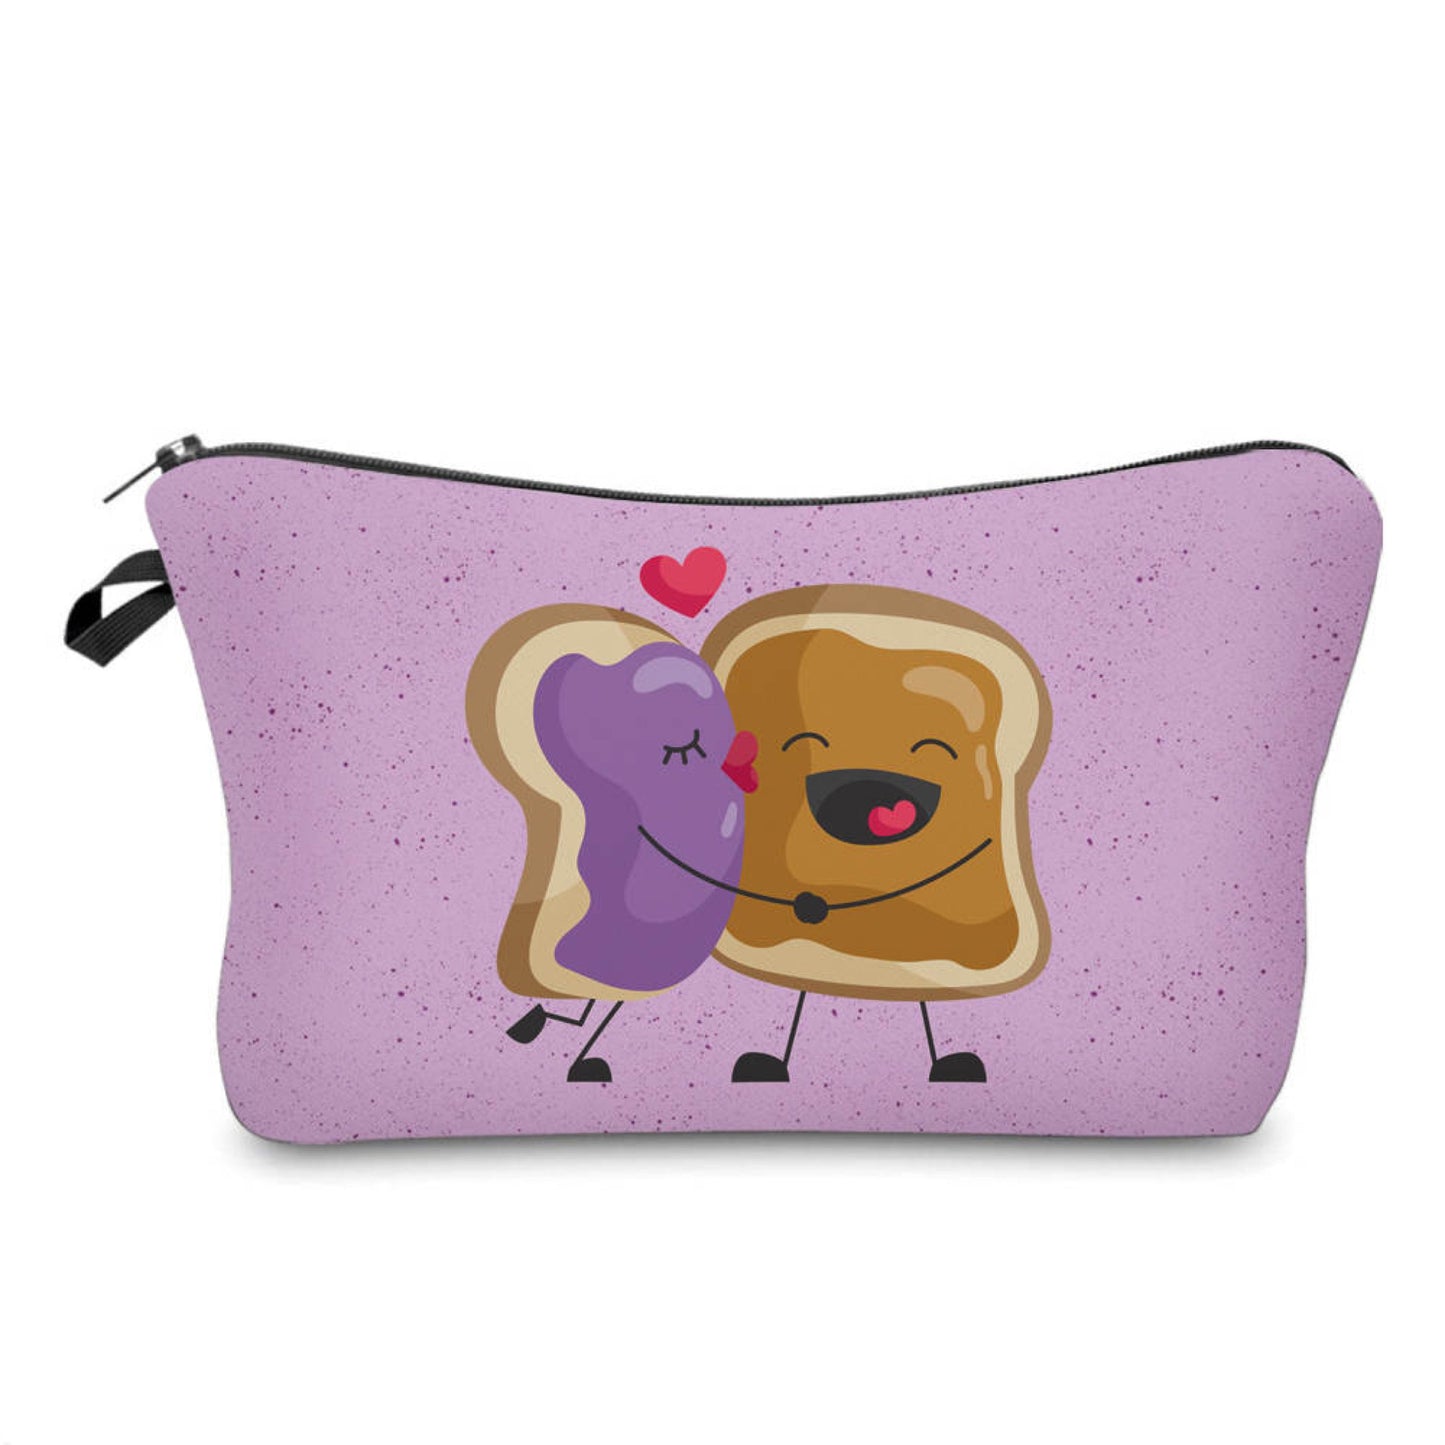 Pouch - Peanut Butter & Jelly